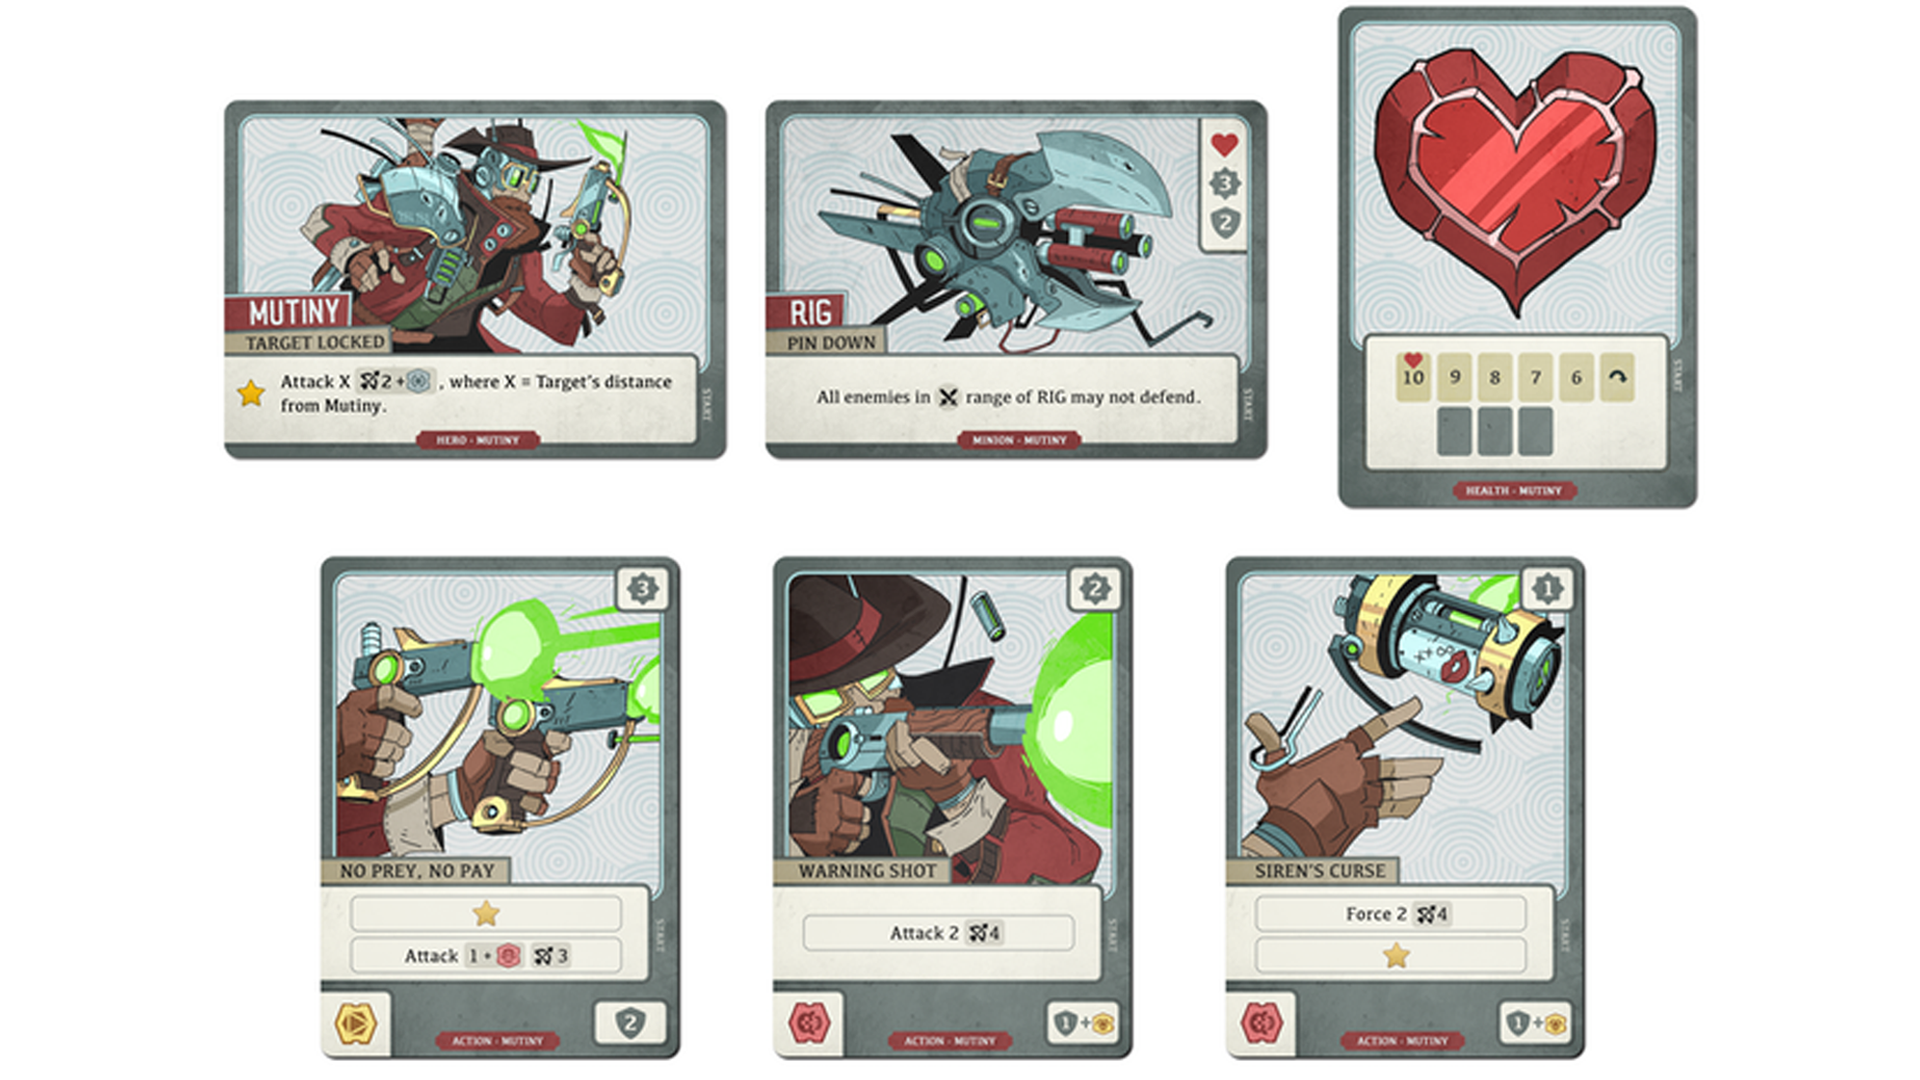 An image of the cards for the Mutiny hero for Battlecrest